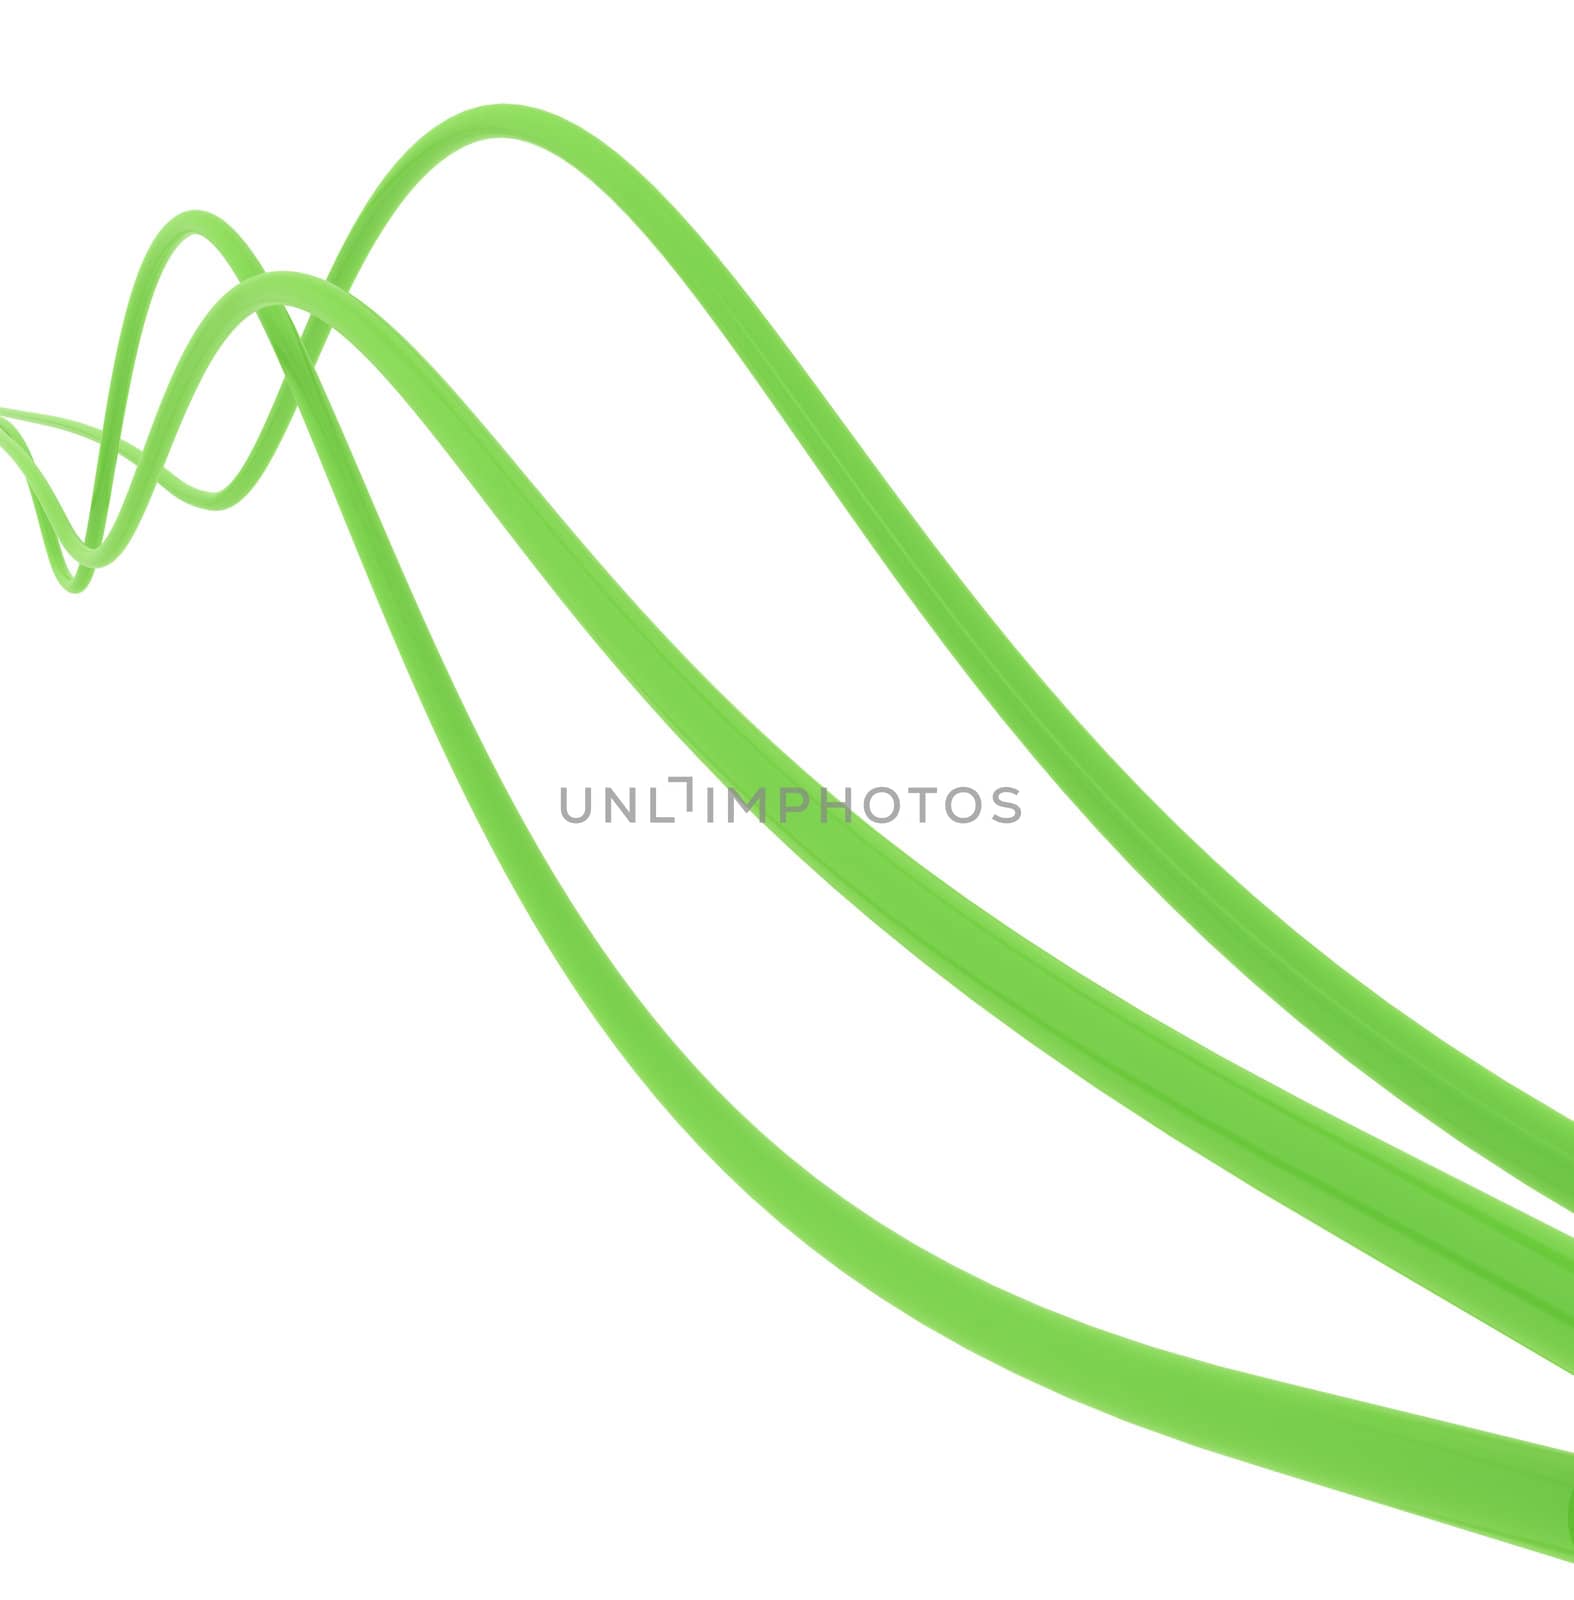 fibre-optical green cables on a white background